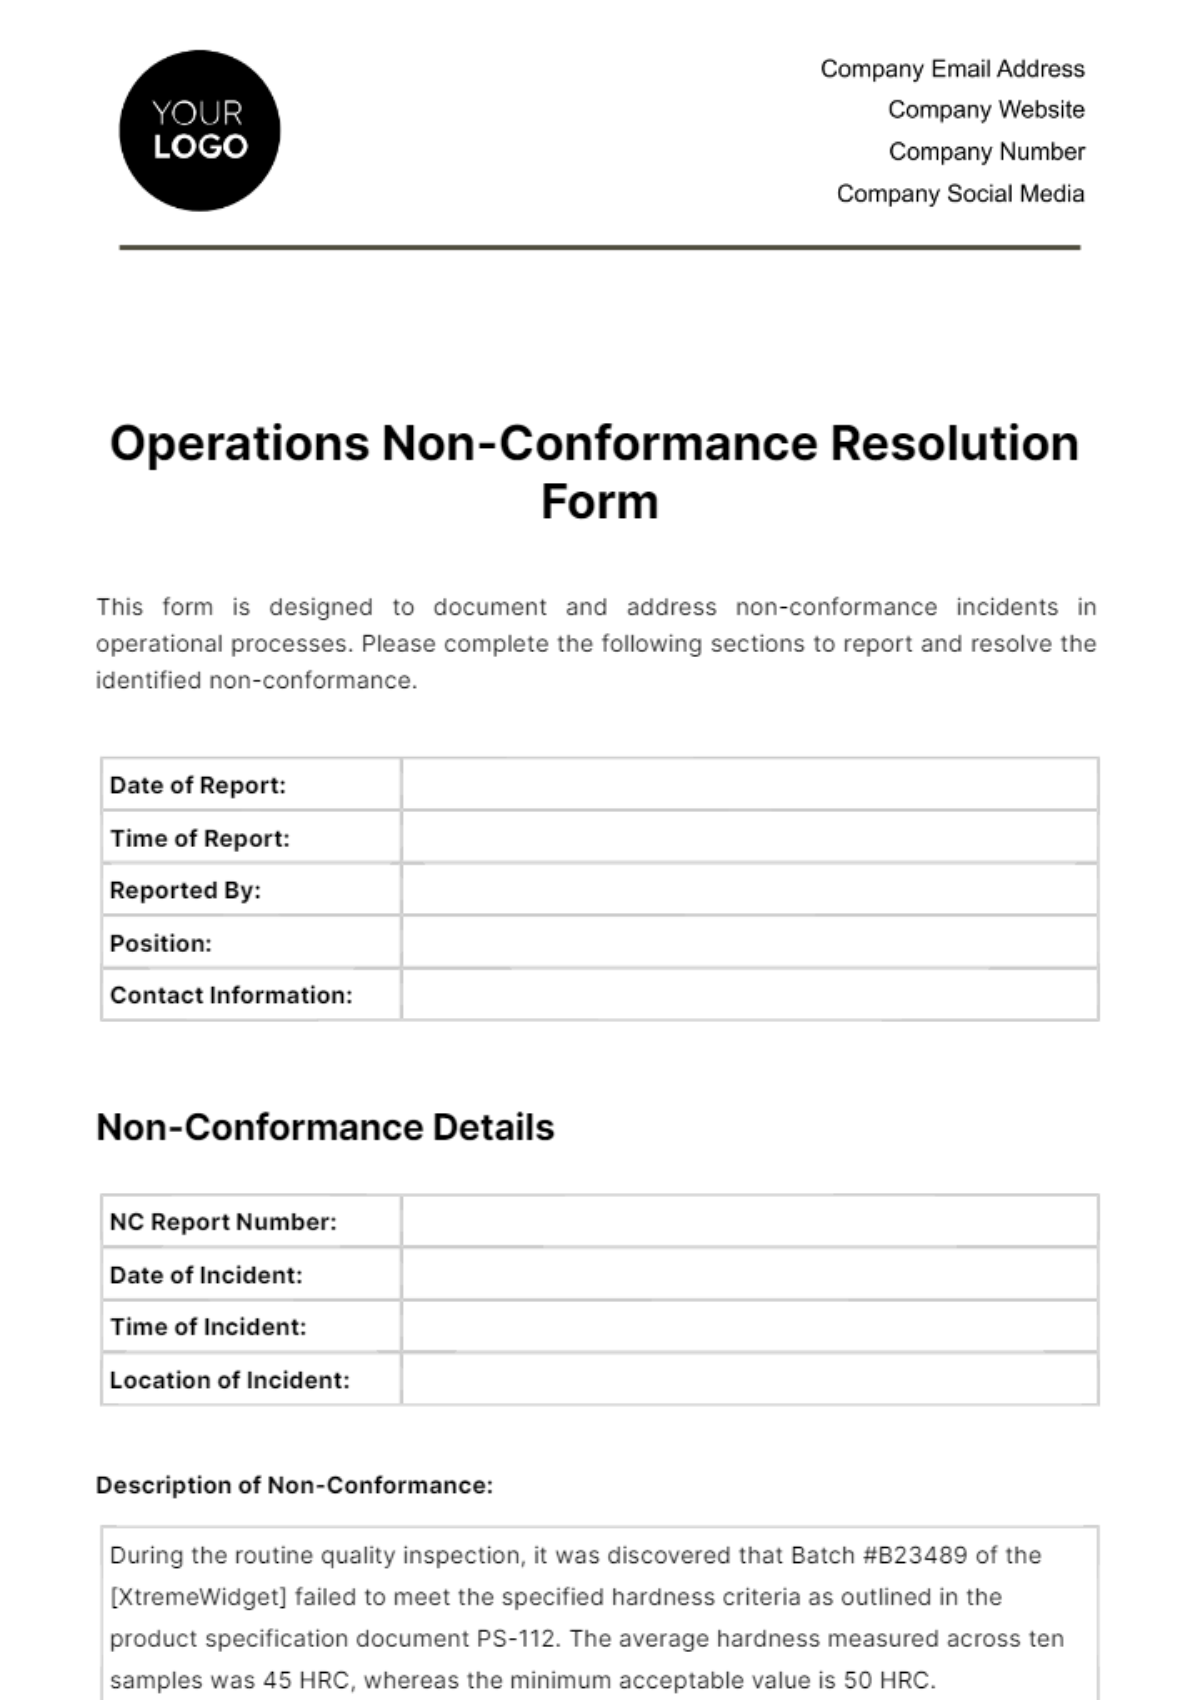 Operations Non-Conformance Resolution Form Template